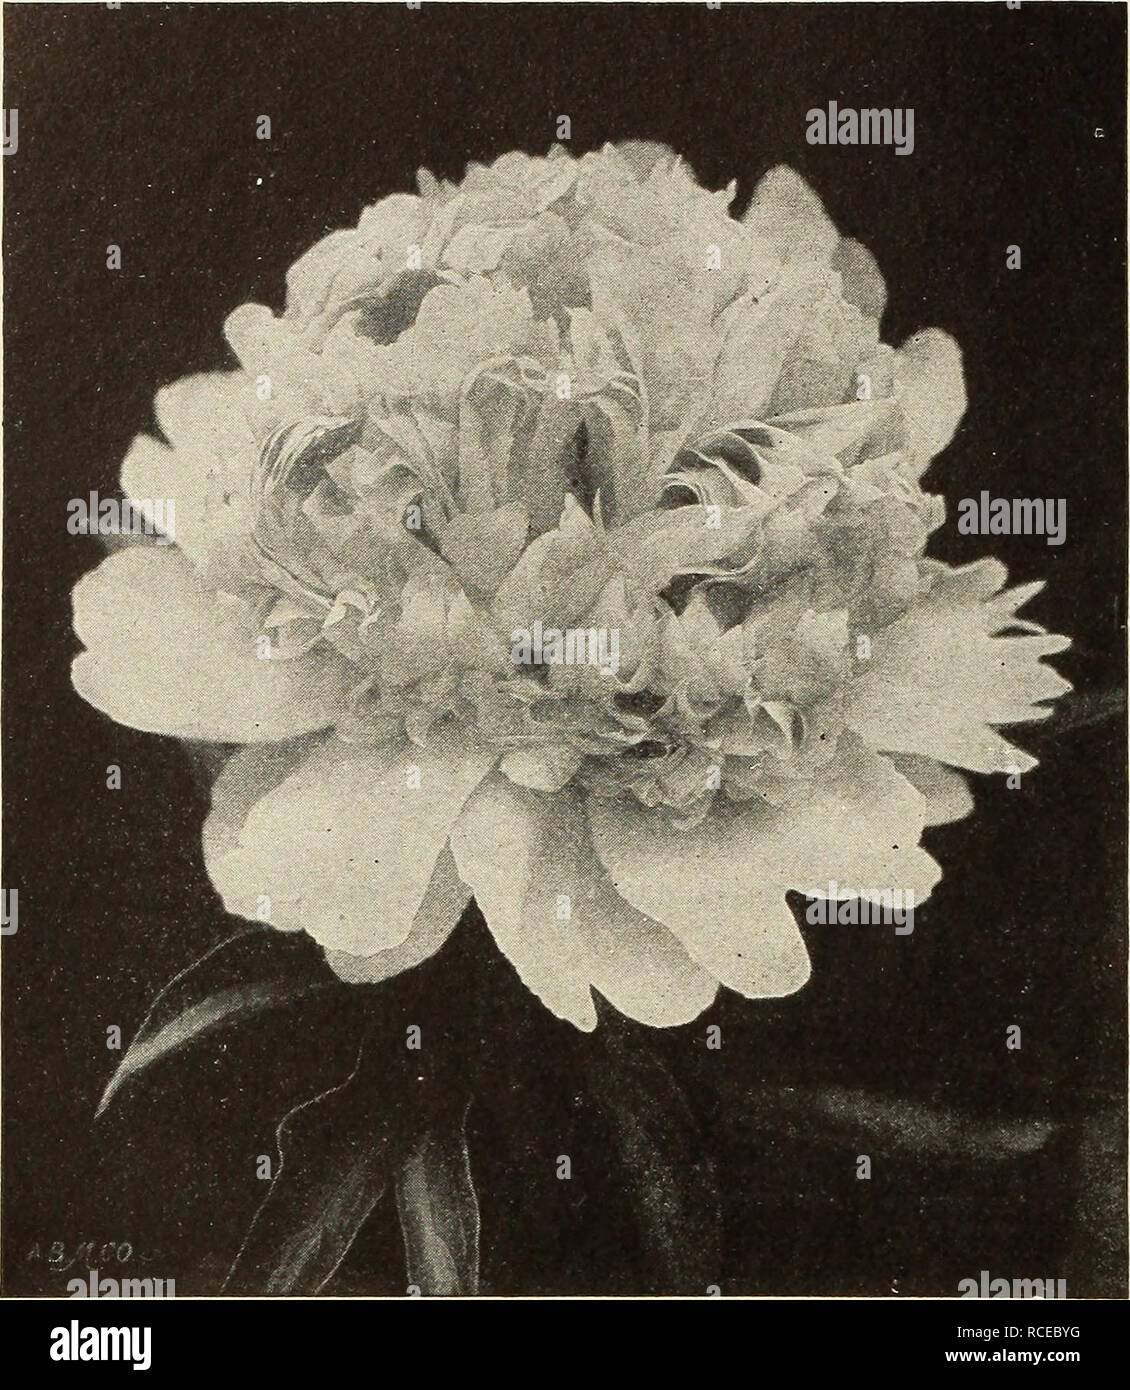 . Dingee guide to rose culture. FOUMDEI 1850 biNGEE Guide To Rose Culture FOUNDED, 1850. Peony. New and Rare Peonies Price, strong roots, 50c each. Set of 8 superb varieties, postpaid, for $3.25. Edulis Superba—Red. Faust—Delicate light pink. Felix Crousse—Brilliant red. Extra fine, Humei Carnea—Light rose, passing into white. Insignis—Beautiful violet pink. Jeanne D'Arc—Pure white. Nobilissima—Dark violet red. Festiva Maxima—White center, flaked red. Double Peonies Price, 40c each; $3.00 per dozen. Set of 14 varieties, $3.25, prepaid. Candidissima—Creamy white, Caroline Allain—Rose and salmon Stock Photo